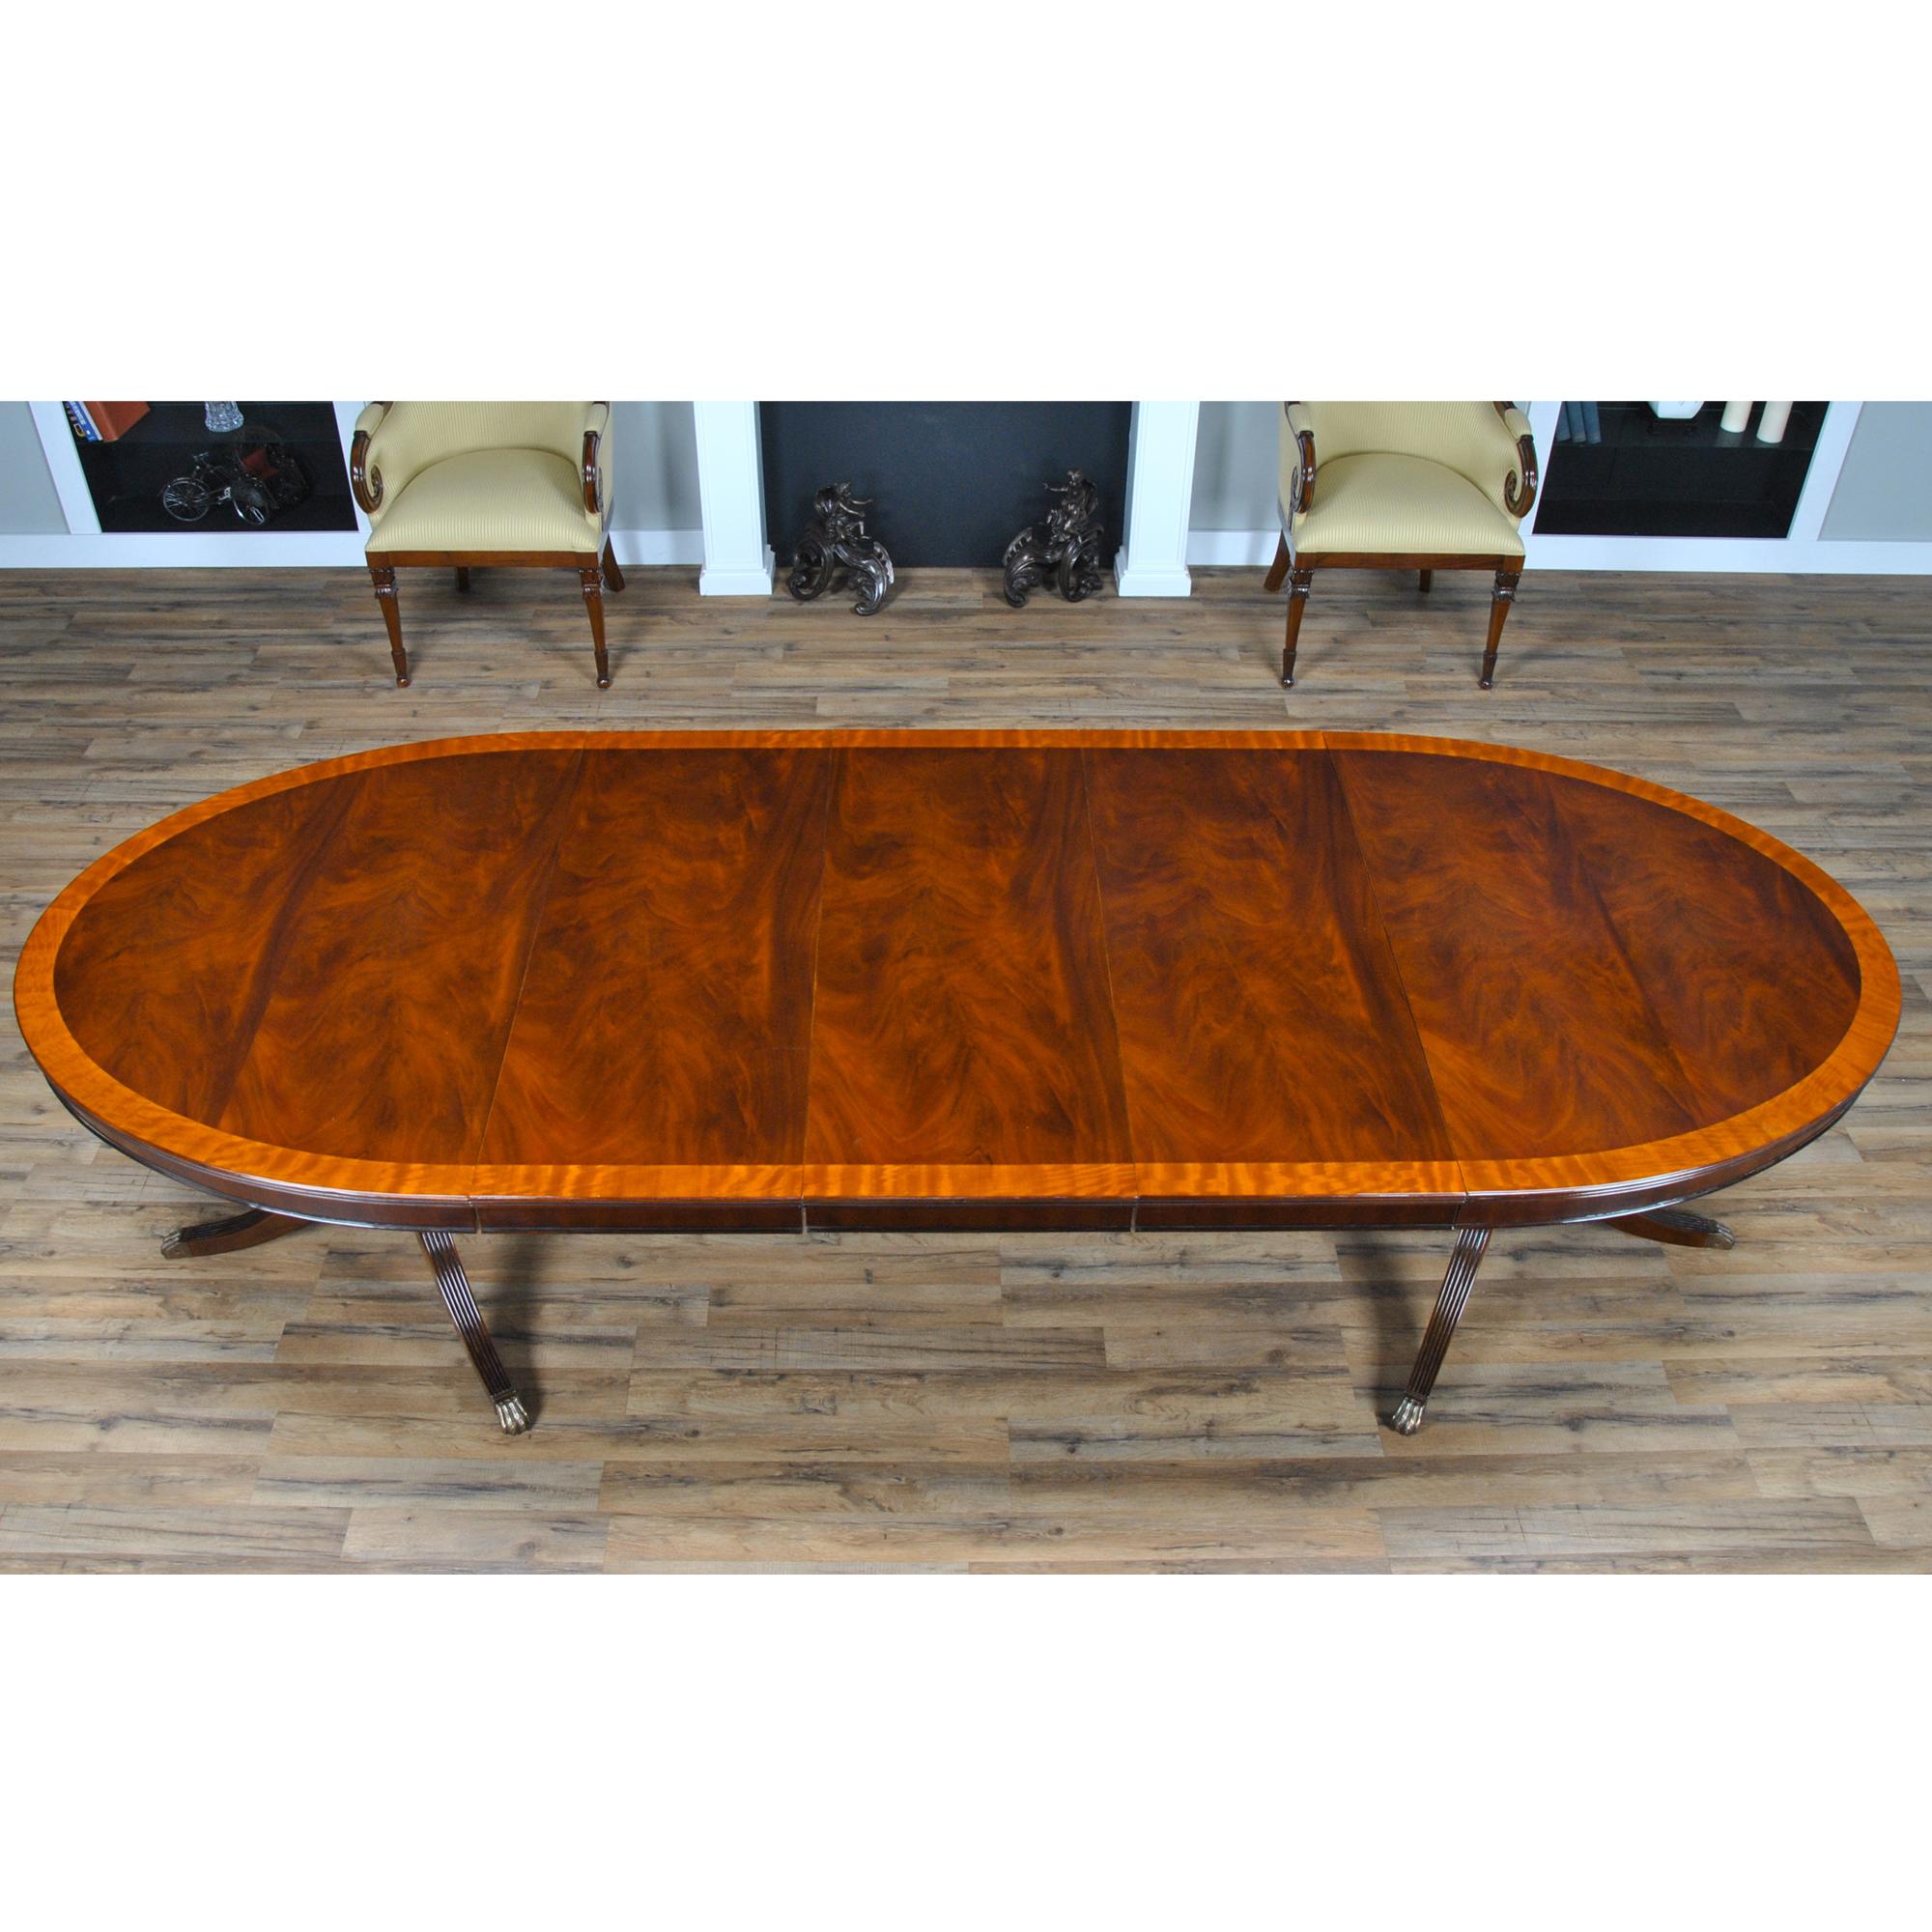 An unusual Long Oval Mahogany Dining Table.  A great table for narrower spaces this dining tables’ tapered ends allow for greater movement around the table even when guests are seated. When closed the long Oval Mahogany Dining Table closes to a